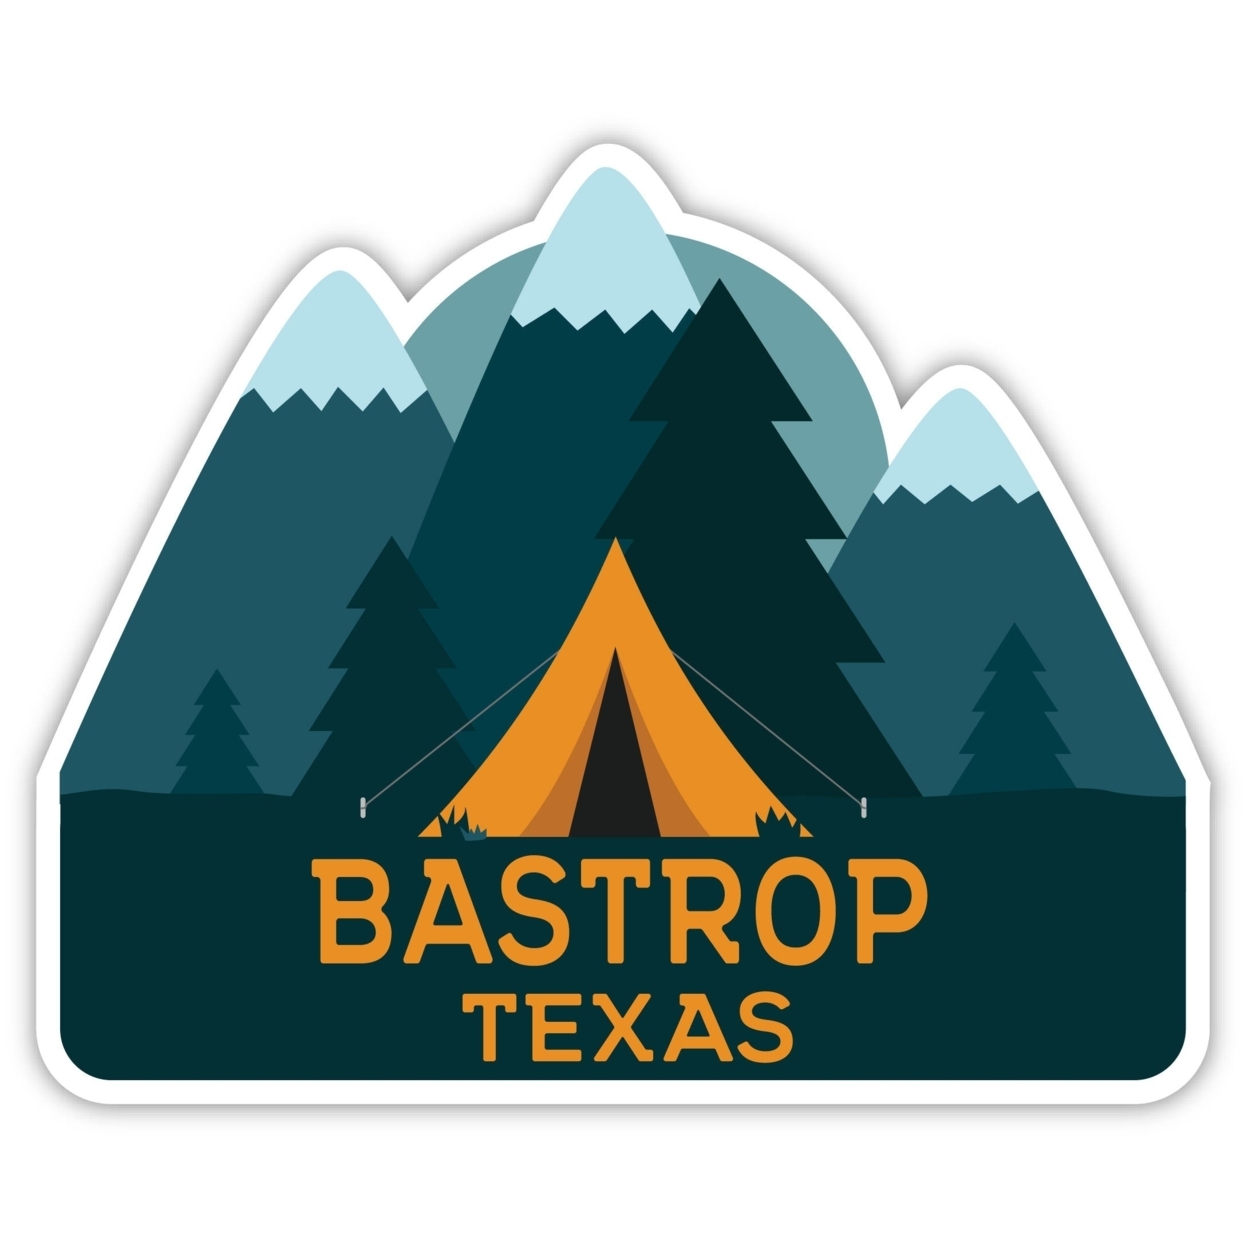 Bastrop Texas Souvenir Decorative Stickers (Choose Theme And Size) - 4-Pack, 6-Inch, Camp Life